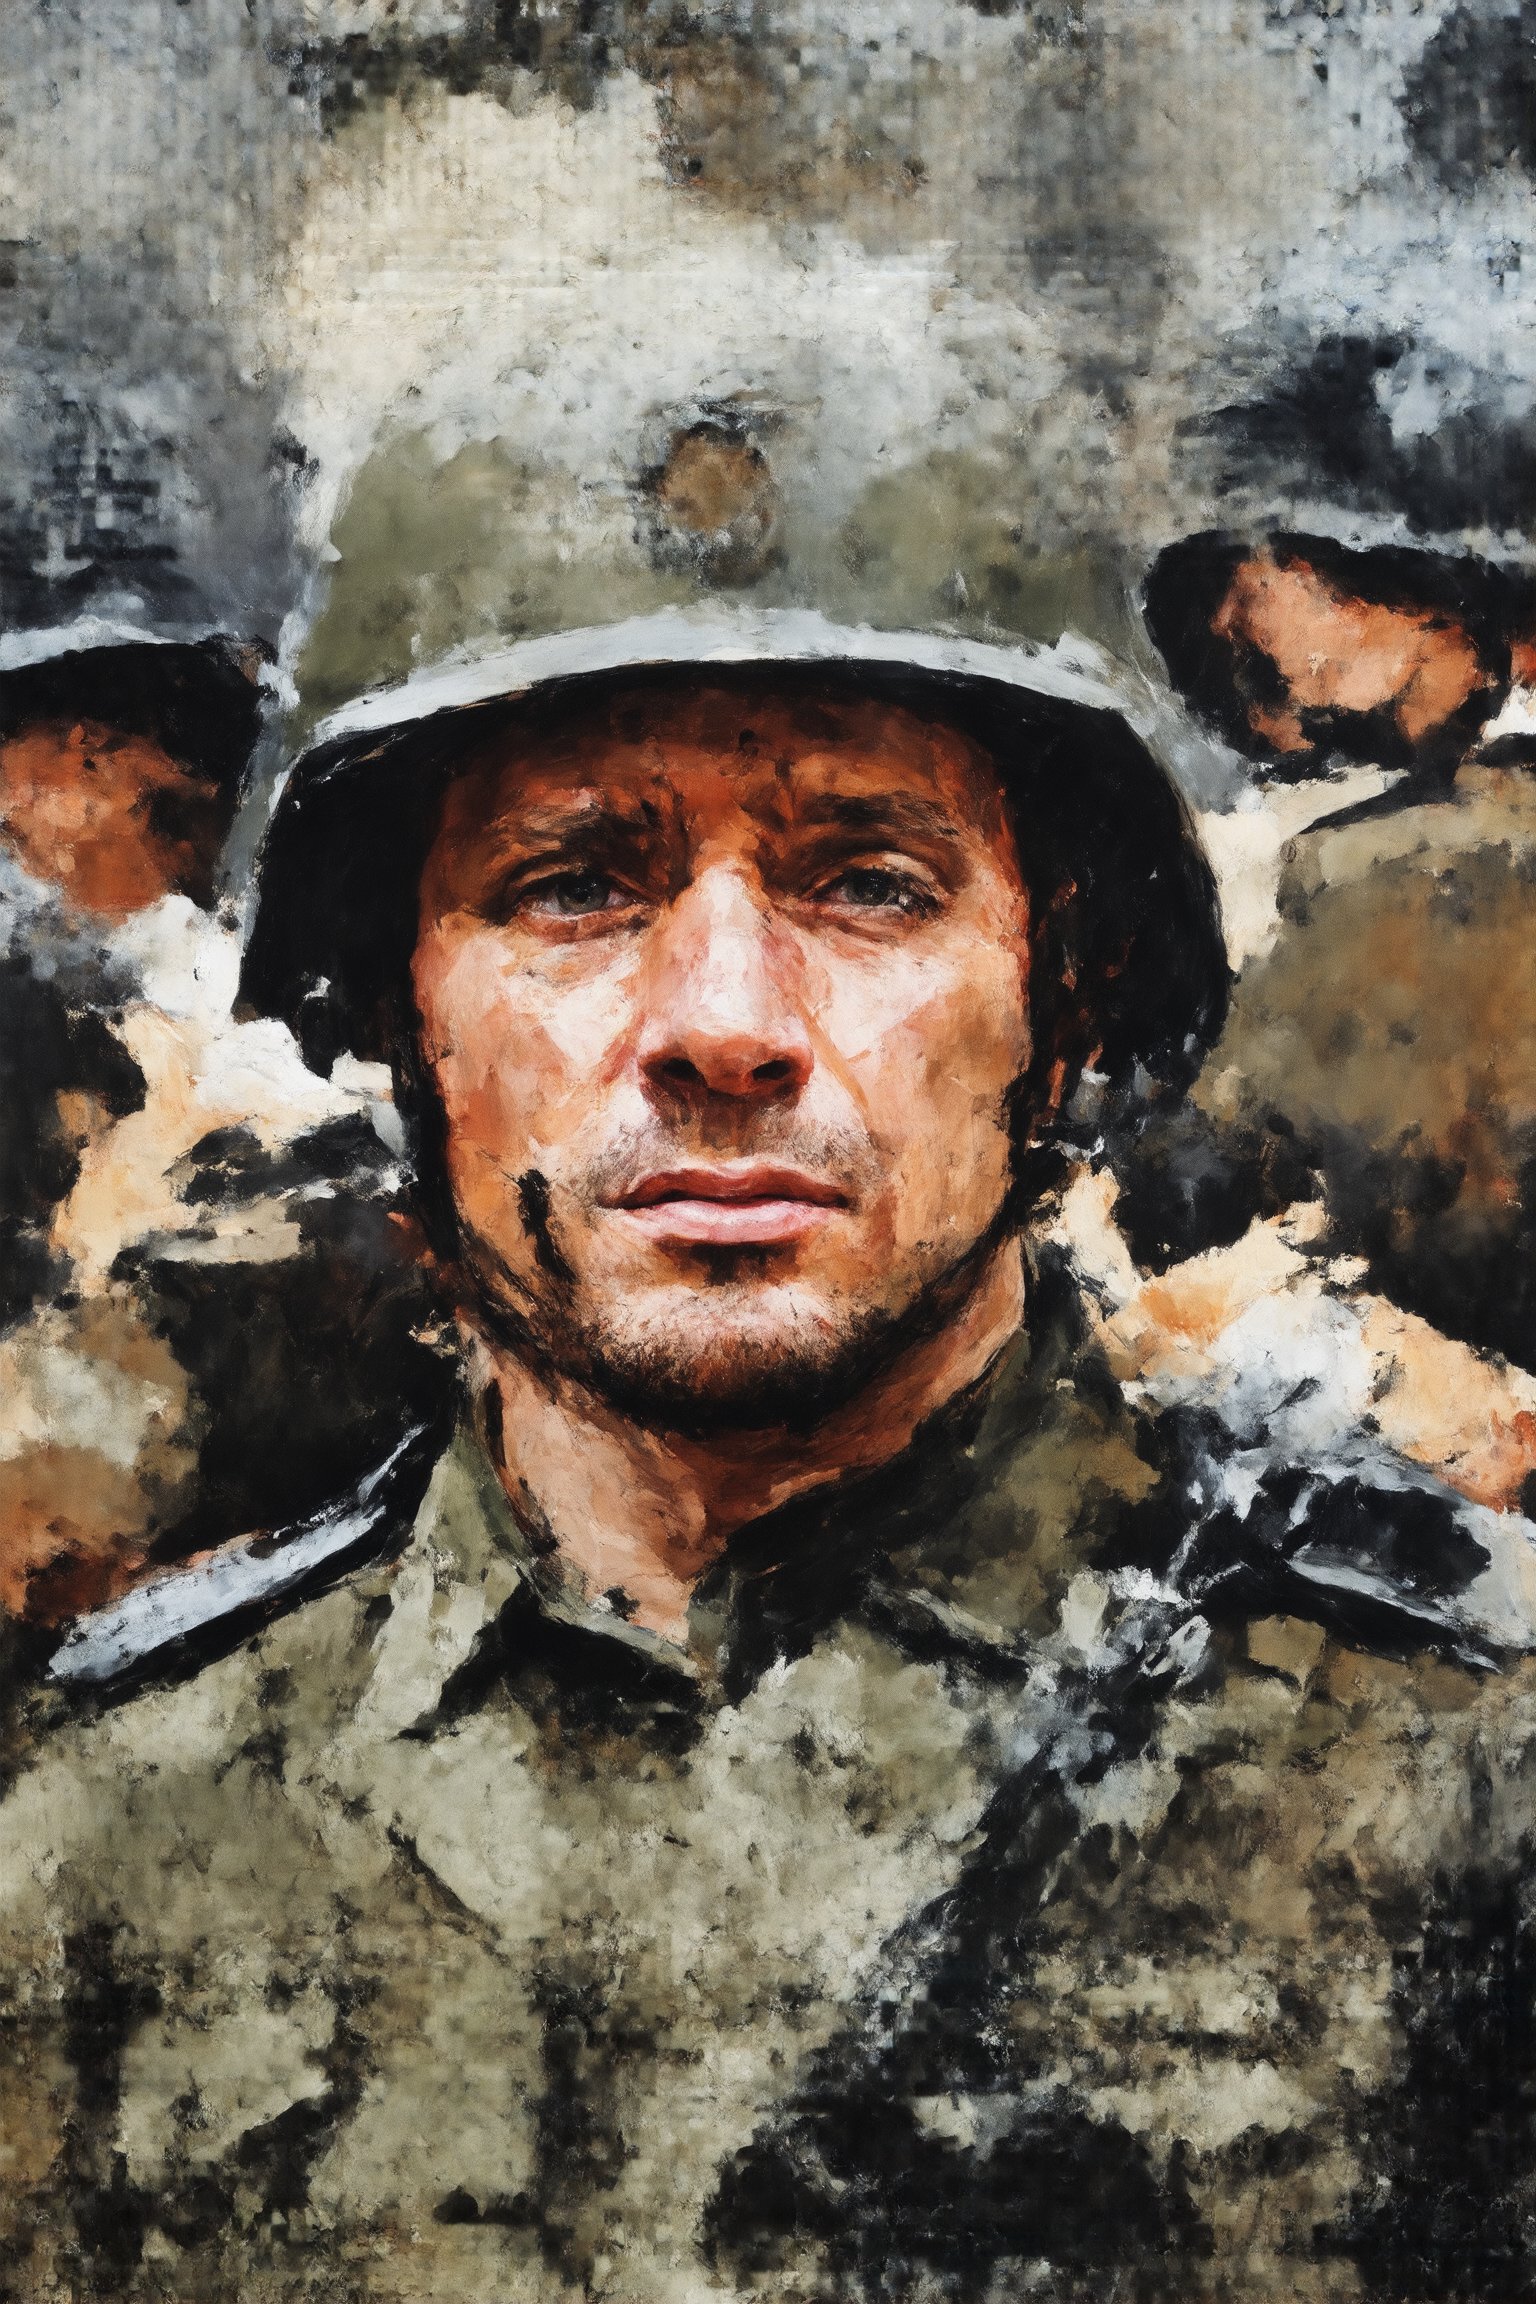 The painting is a silkscreen print on canvas that depicts a scene from a contemporary war. The image is a close-up of a soldier's face, who is in the midst of battle. The soldier's expression is one of pure terror, and his eyes are wide with fear. His face is covered in dirt and blood, and his uniform is torn and ragged. In the background, there is a blur of activity, as other soldiers fight and die. The overall impression of the painting is one of chaos and violence.

Additional Details

The soldier's face is the only recognizable object in the painting. The rest of the image is a blur of colors and shapes.
The colors in the painting are bright and garish, which adds to the sense of chaos and violence.
The painting is made up of many small dots of color, which is a characteristic of Warhol's silkscreen printing technique.
Interpretation

The painting can be interpreted in a number of ways. On one level, it can be seen as a commentary on the horrors of war. The soldier's terrified expression and the chaotic scene around him convey the brutality and senselessness of war.

On another level, the painting can be seen as a critique of the way that war is often portrayed in the media. The use of bright, garish colors and the blurring of the background figures make the scene seem unreal and dreamlike. This suggests that war is often sanitized and romanticized in the media, which can make it easier for people to accept and even glorify it.

Overall, the painting is a powerful and disturbing work of art that forces the viewer to confront the realities of war. It is a reminder of the human cost of conflict, and it challenges us to think critically about the way that war is represented in our society.

Additional Information

The painting is titled "War" and it was created by Andy Warhol in 1968. It is part of his series of silkscreen prints that depict scenes of violence and tragedy. The painting is now in the collection of the Museum of Modern Art in New York City.